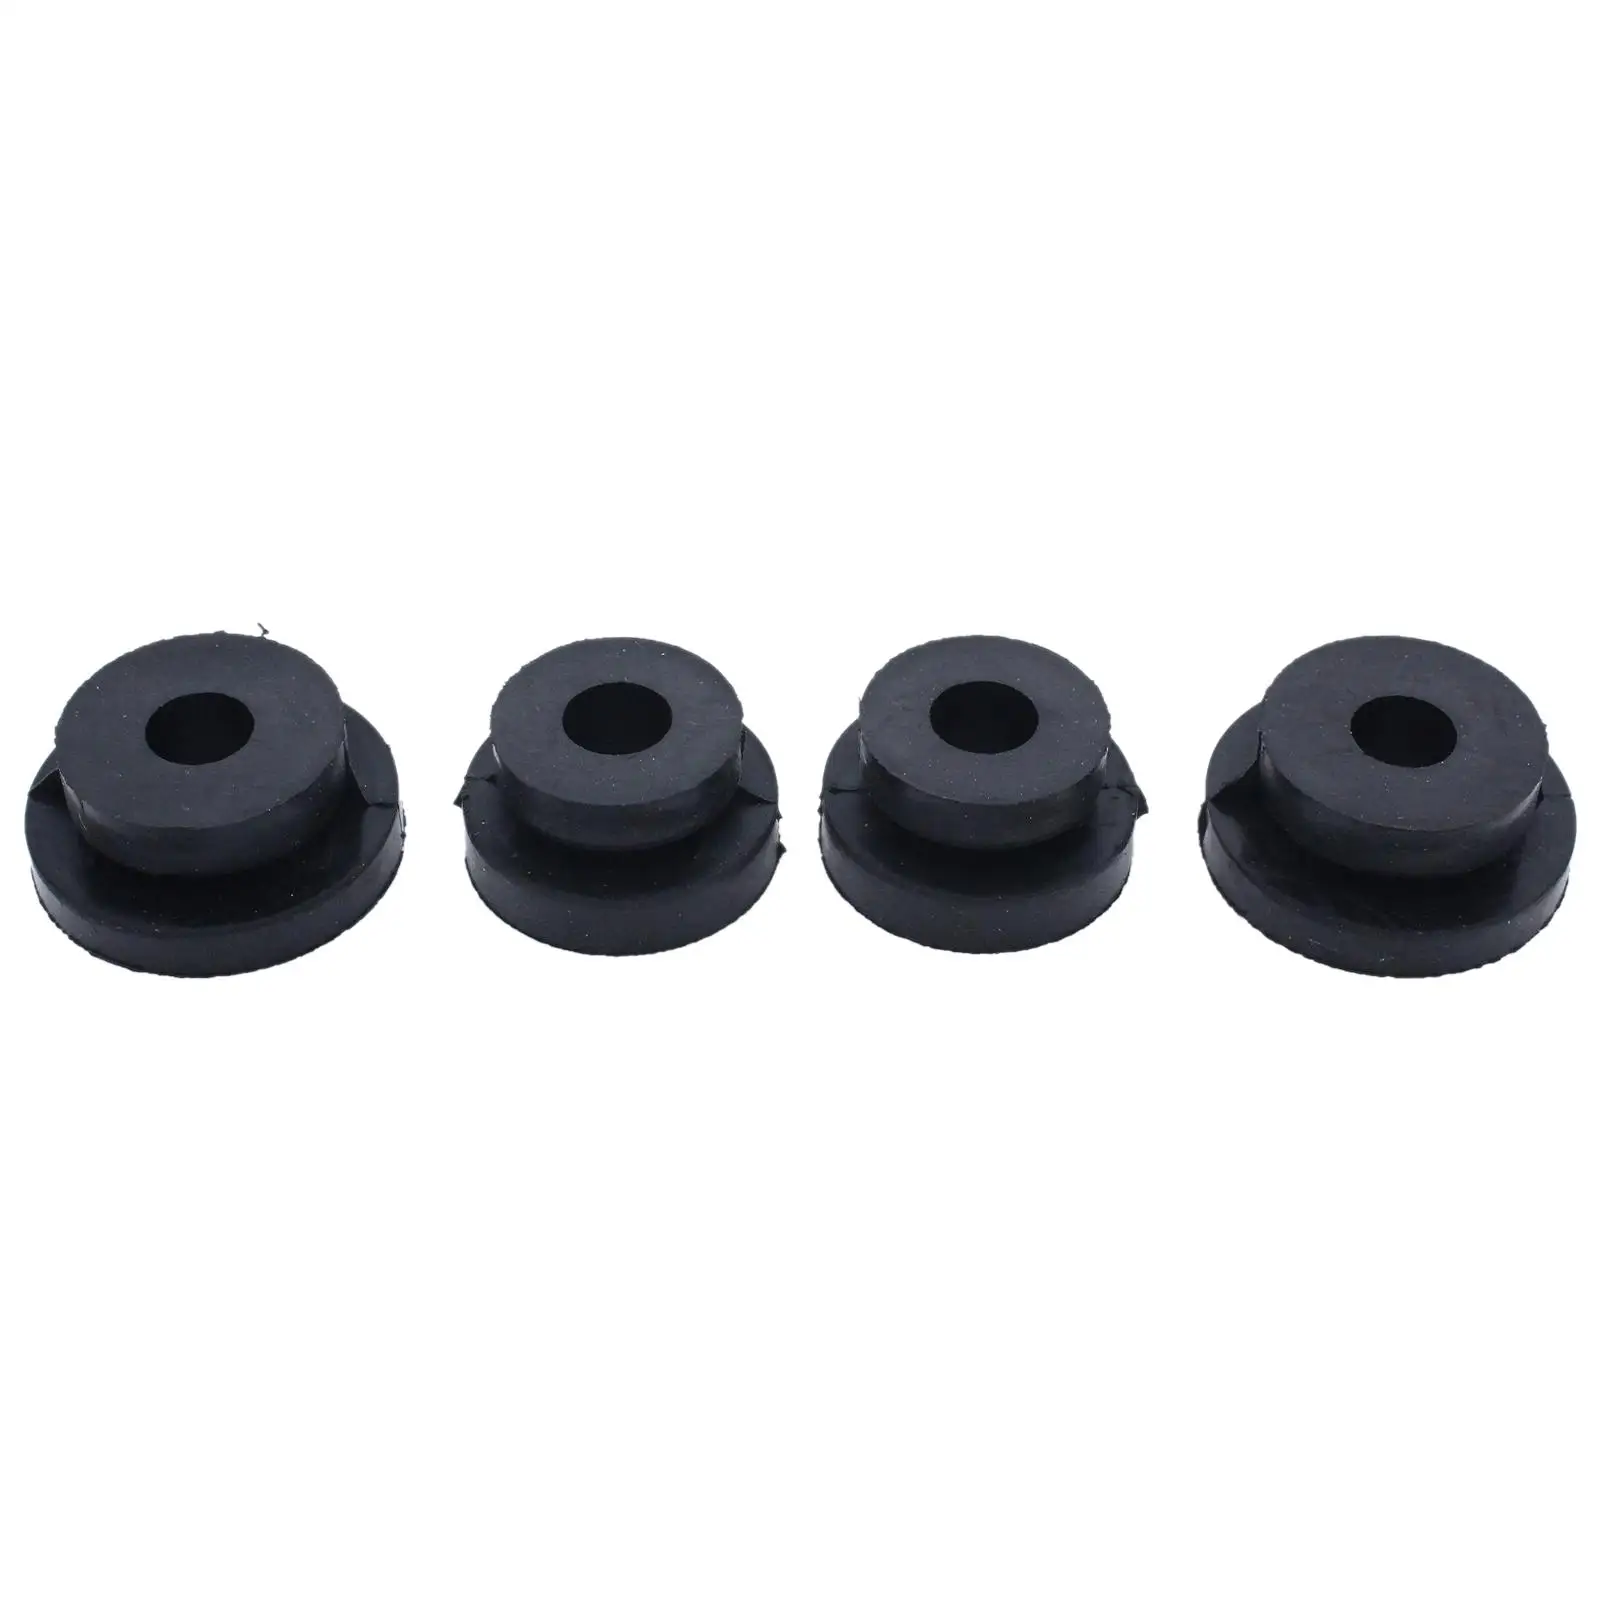 Pack of 4 Car Radiator Rubber Mounting Rubbers 572312 Fits for Defender 200Tdi & 300Tdi Durable Direct Replaces Easy to Install